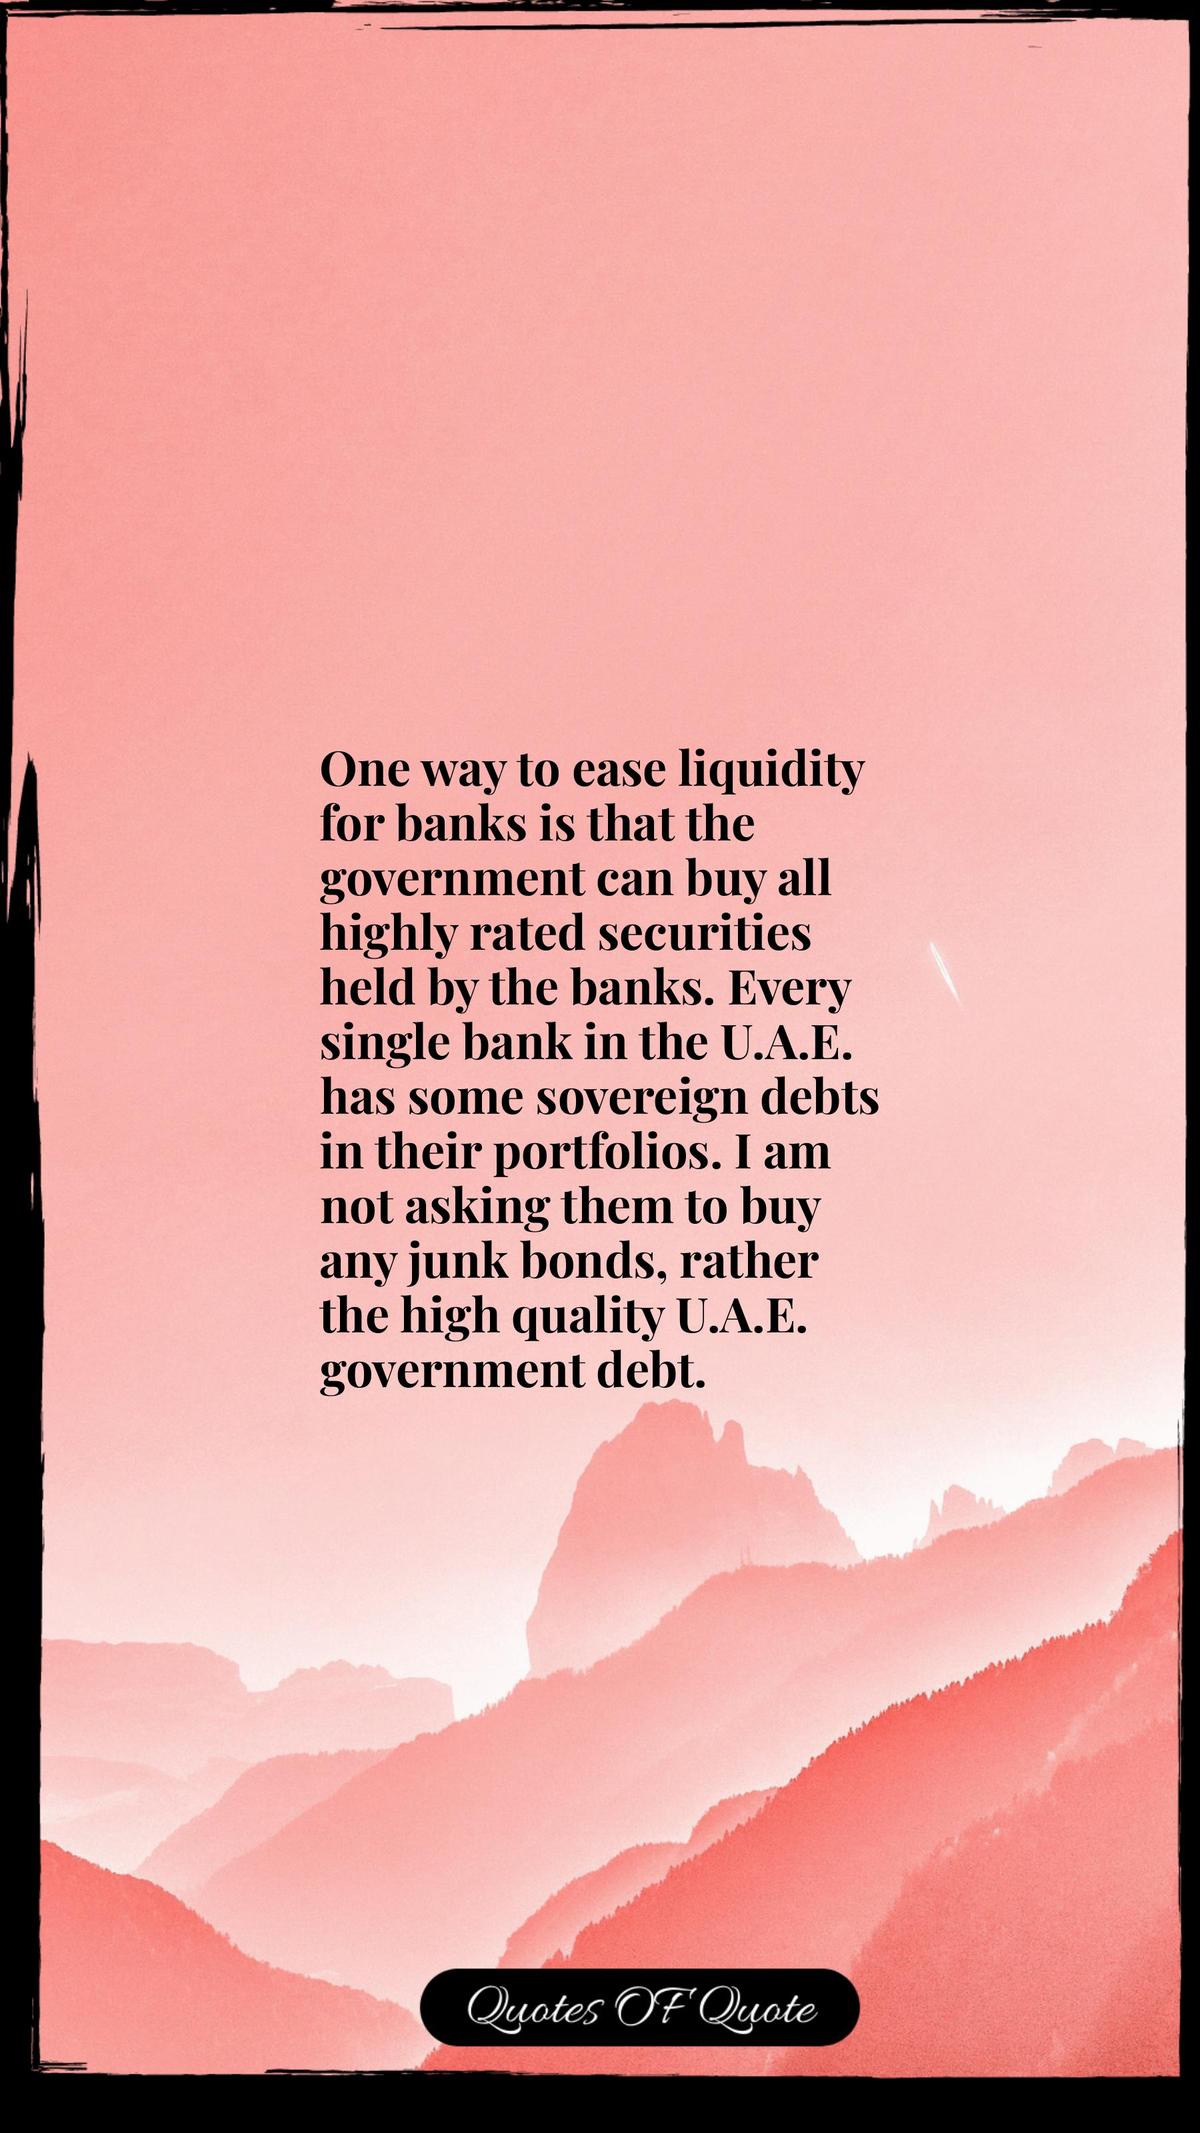 One way to ease liquidity for banks is that the government can buy all highly rated securities held by the banks. Every single bank in the U.A.E. has some sovereign debts in their portfolios. I am not asking them to buy any junk bonds, rather the high quality U.A.E. government debt.